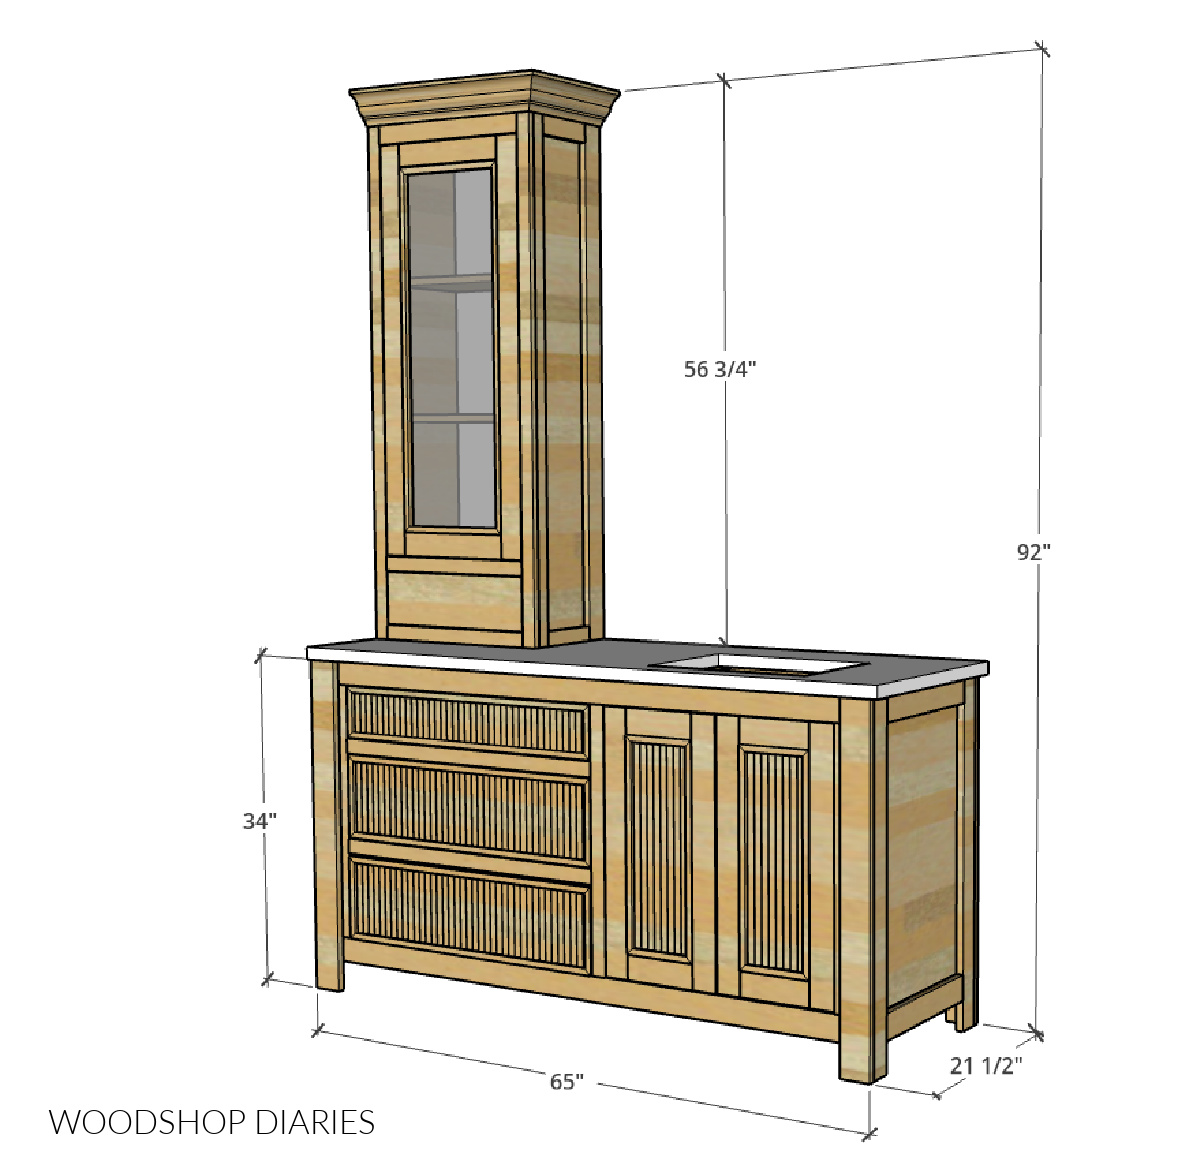 Overall dimensional diagram of bathroom vanity with off center sink including tall cabinet